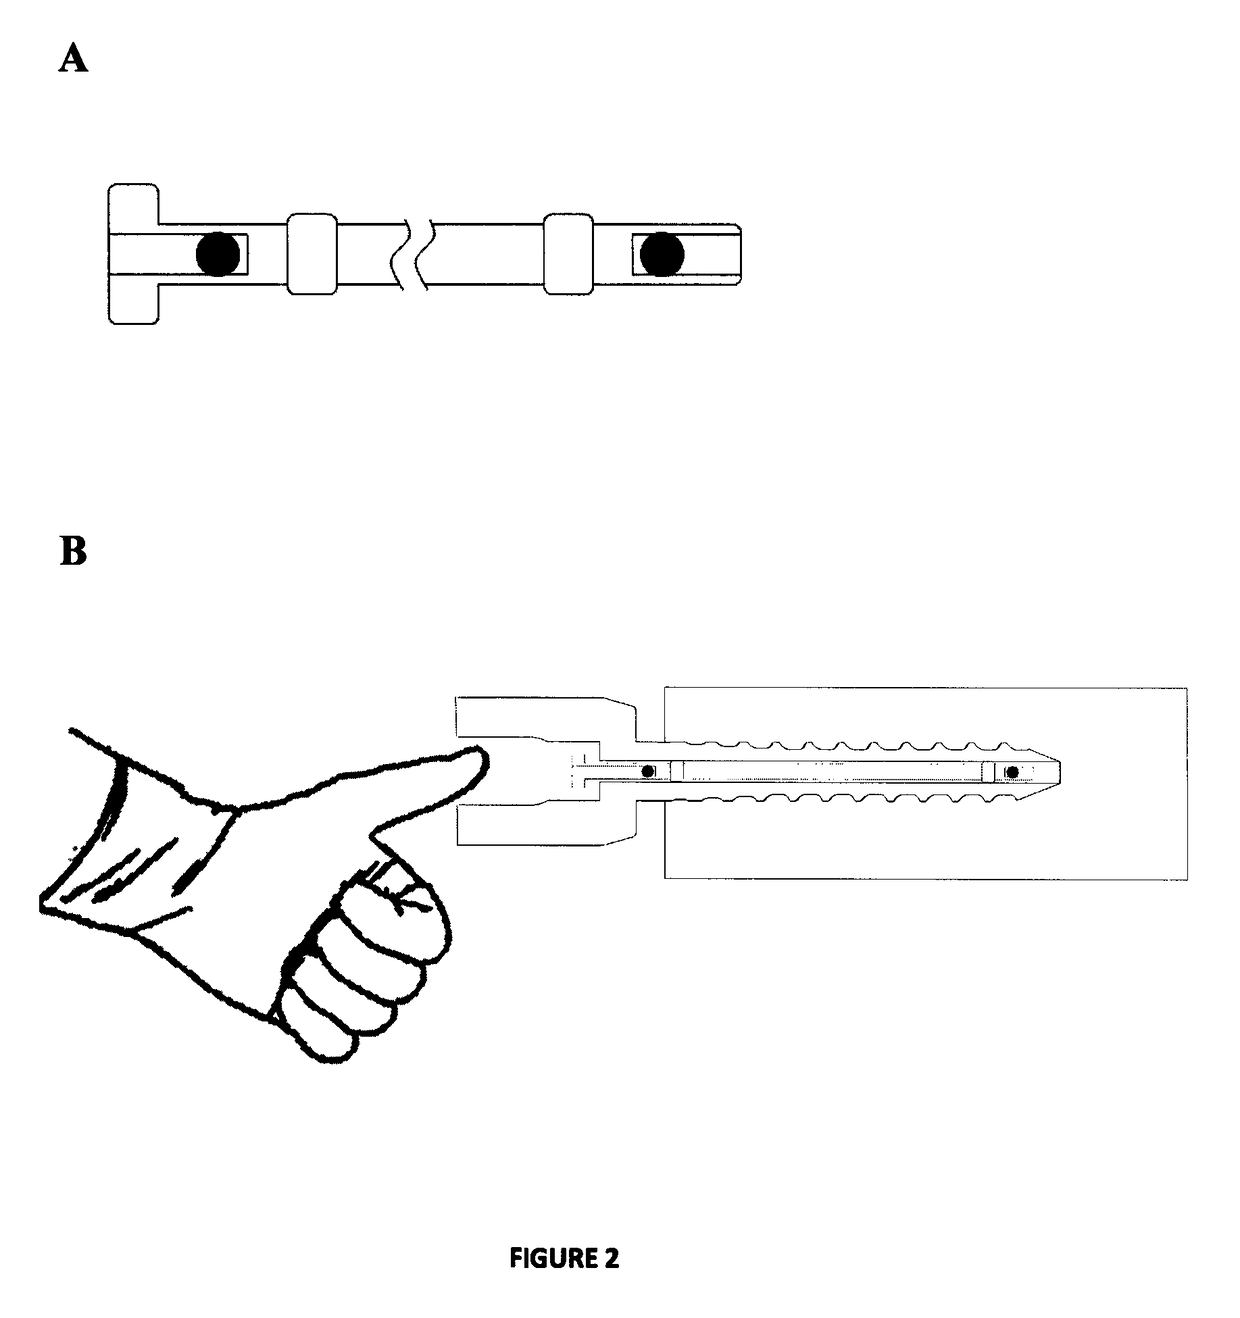 Method of detecting movement between an implant and a bone